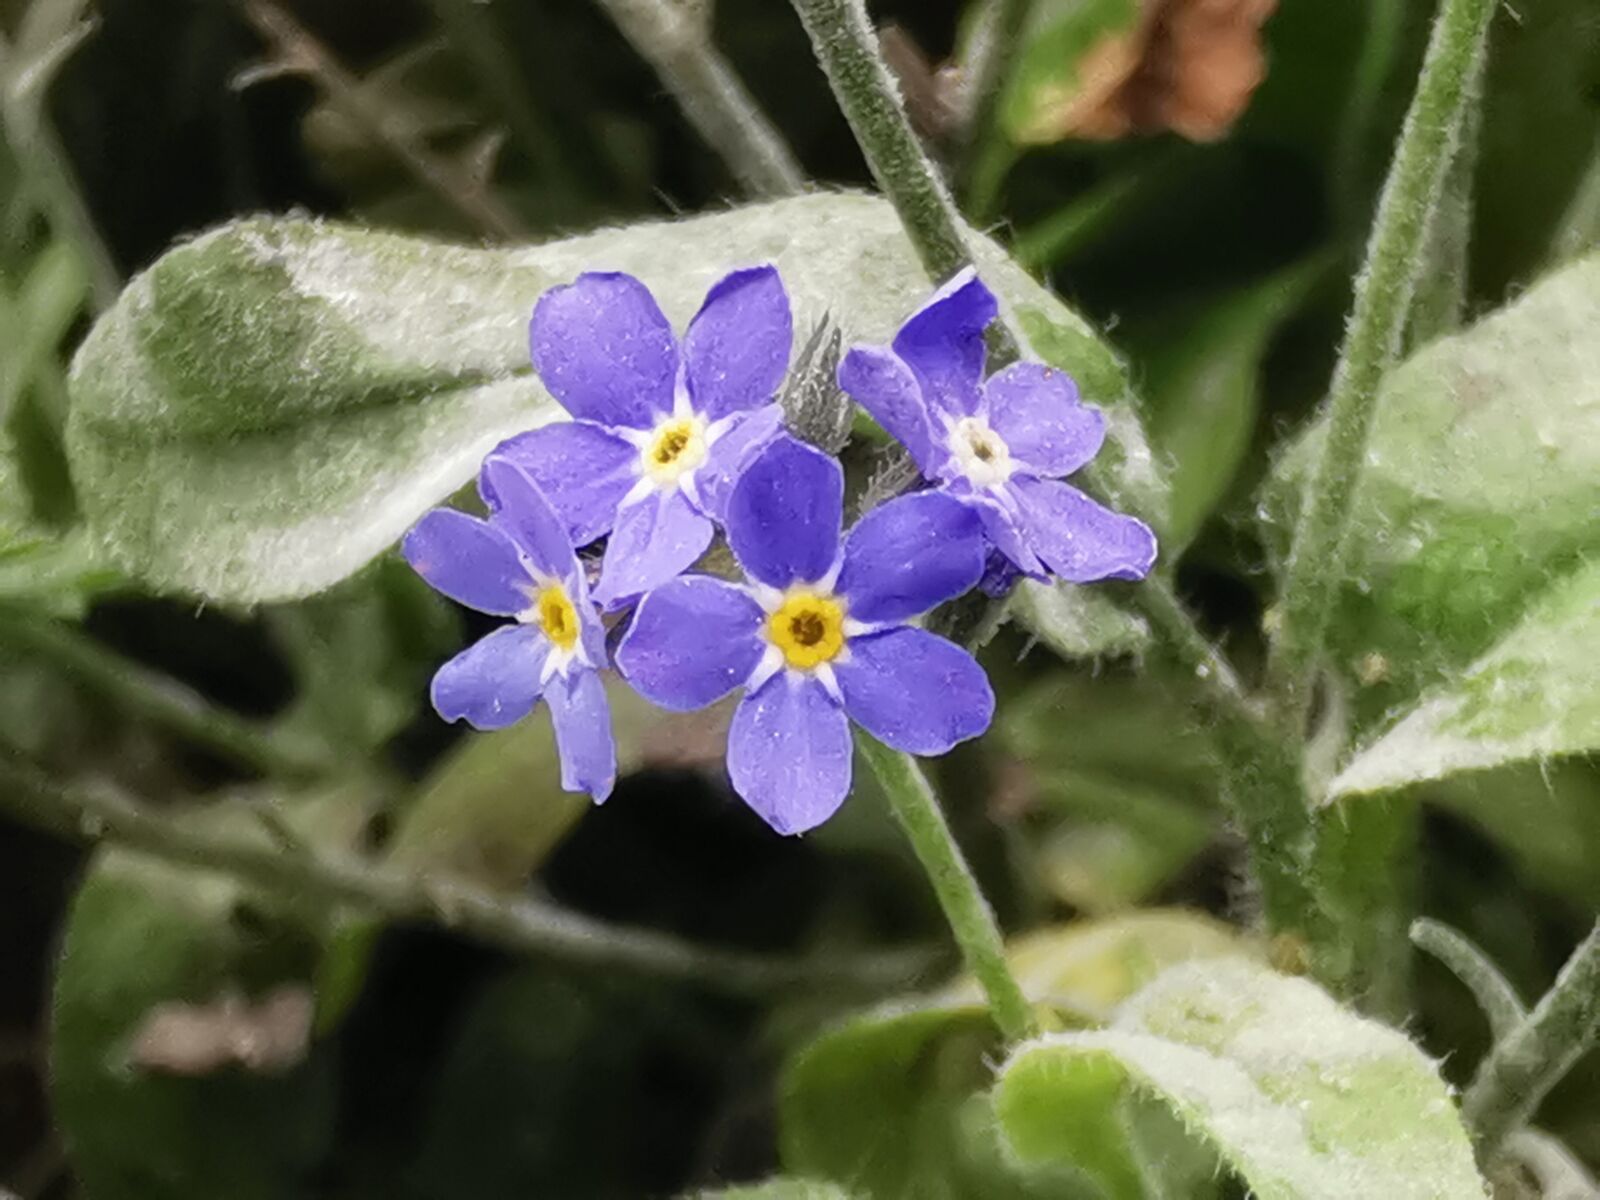 HUAWEI P30 sample photo. Forget me not, flower photography